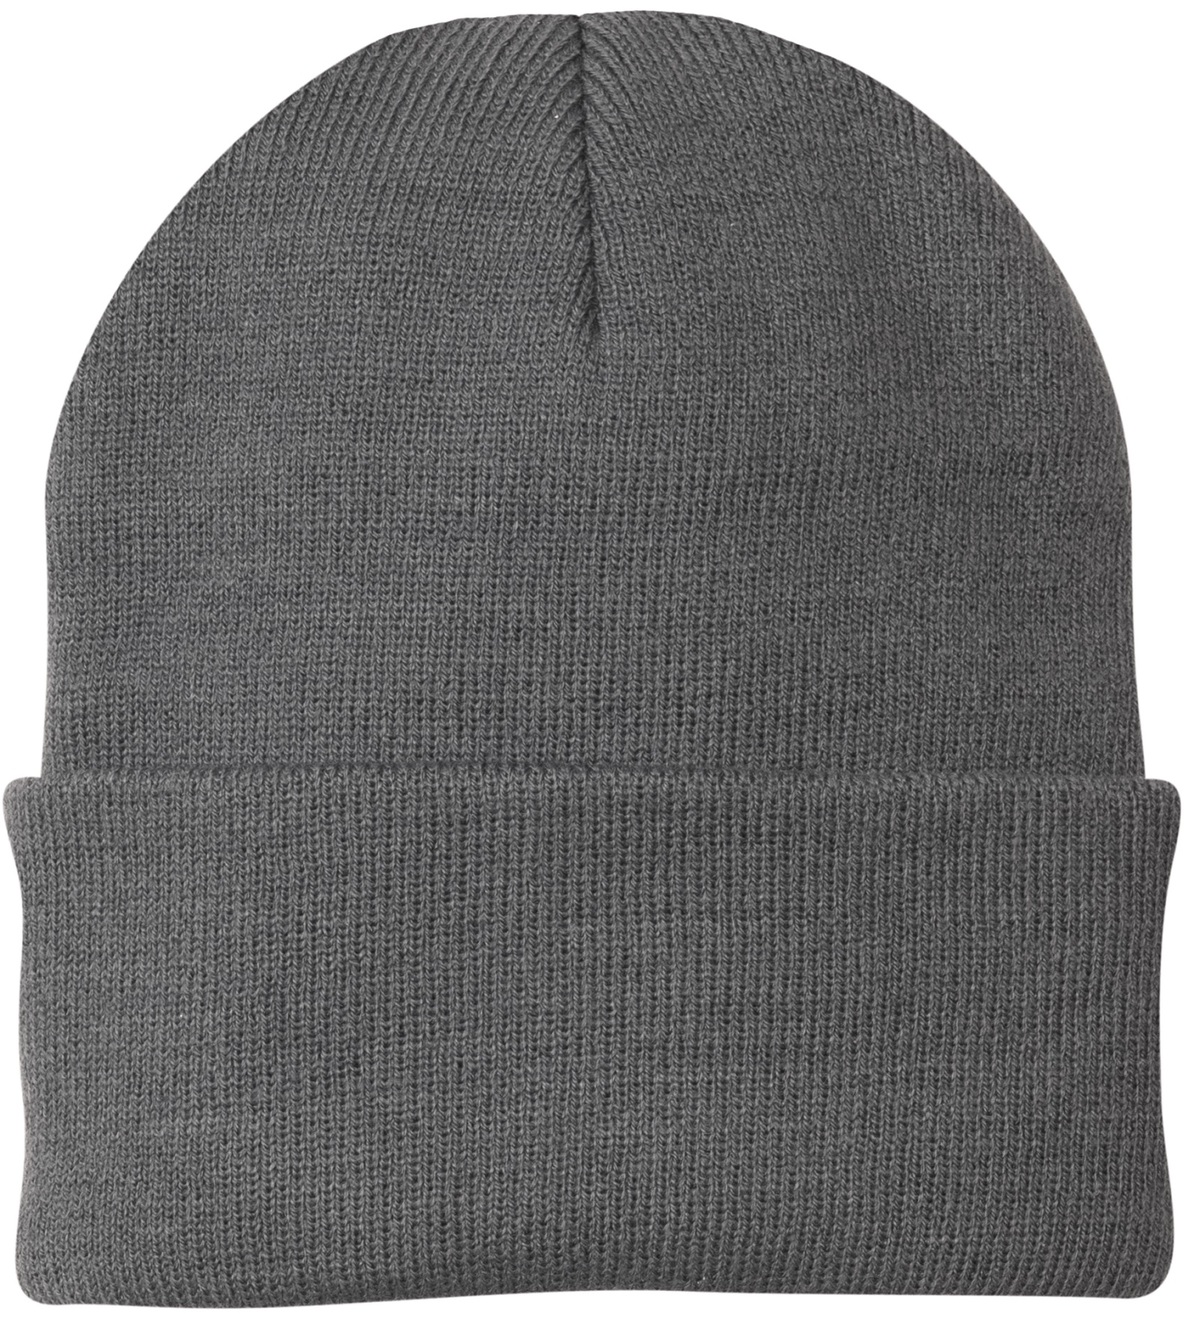 Port & Company Embroidered Knit Hat | Hats & Beanies - Queensboro